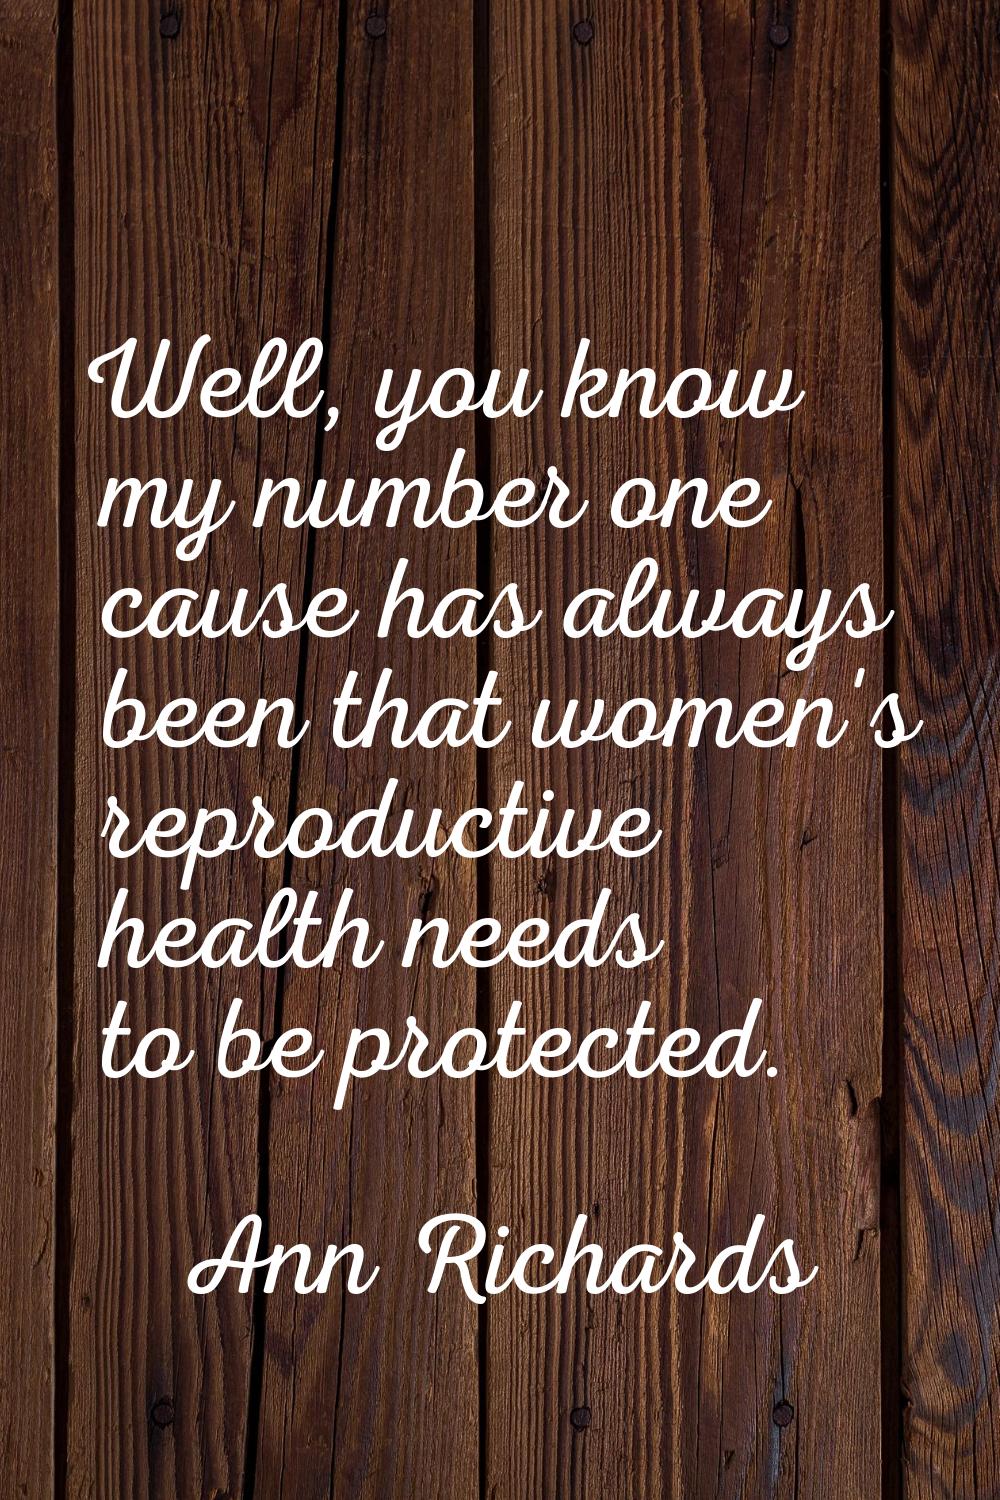 Well, you know my number one cause has always been that women's reproductive health needs to be pro